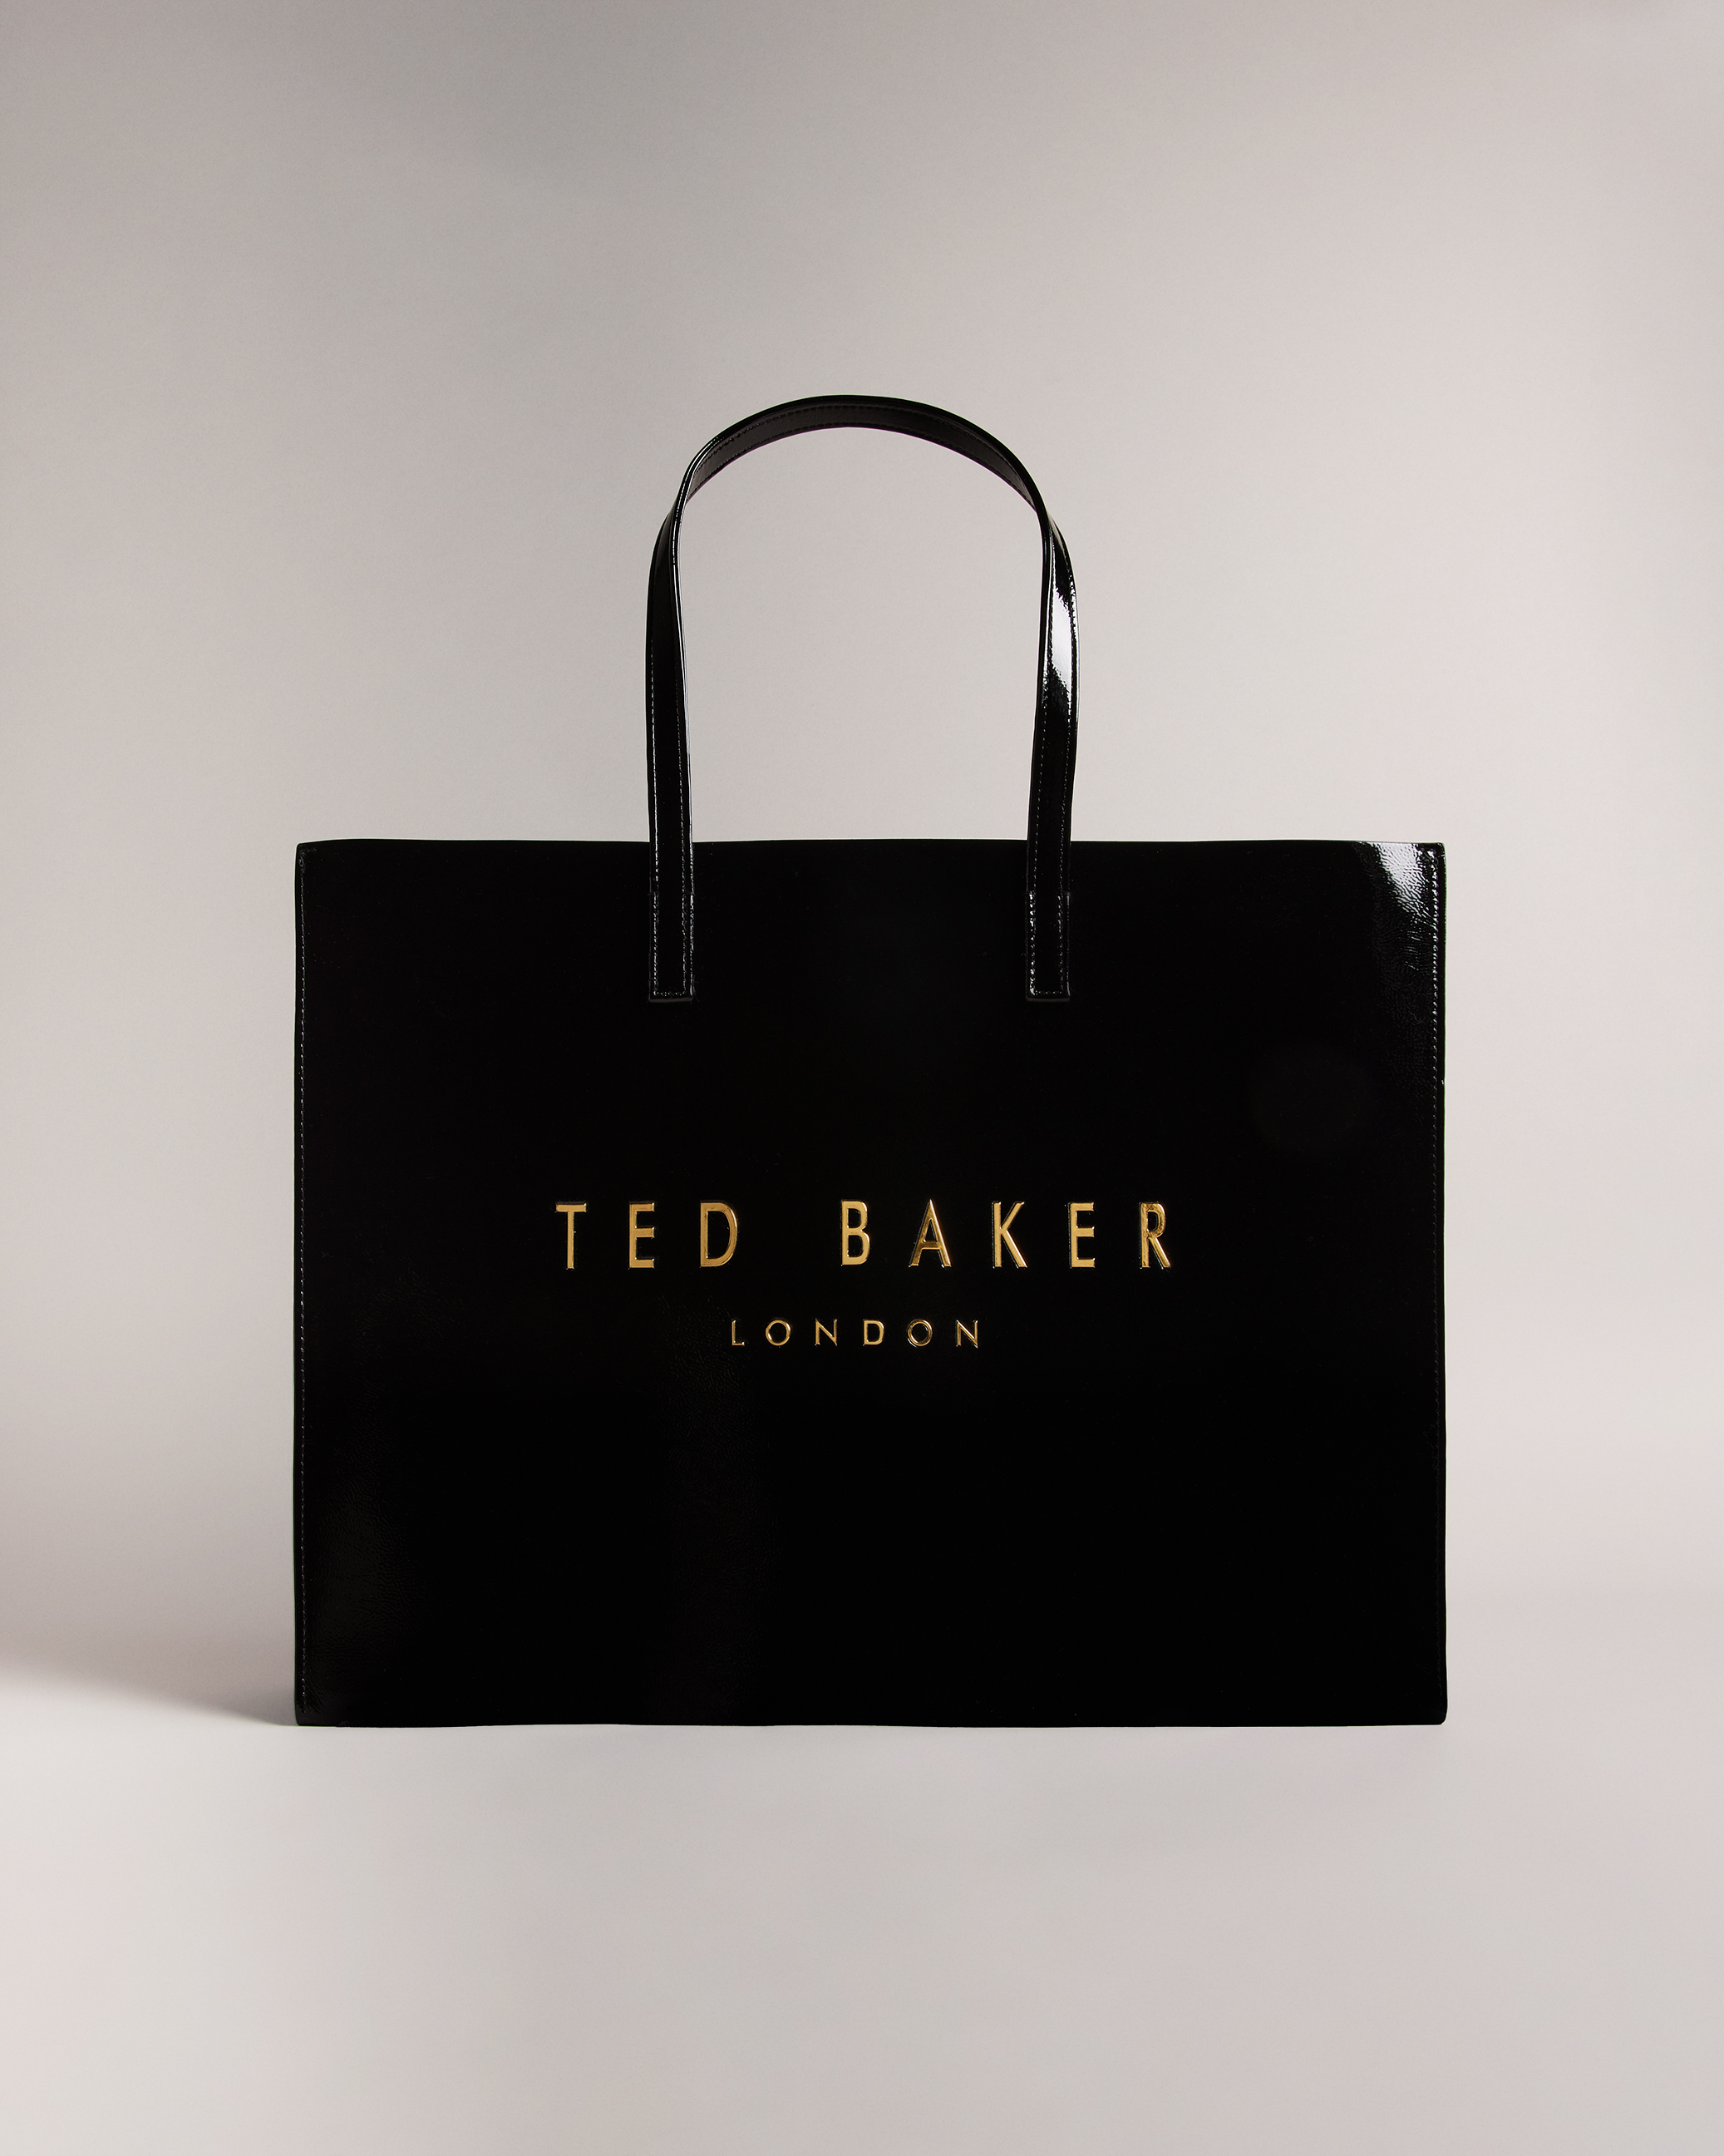 35 TED BAKER ICON ideas  ted baker bag, bags, ted baker icon bag